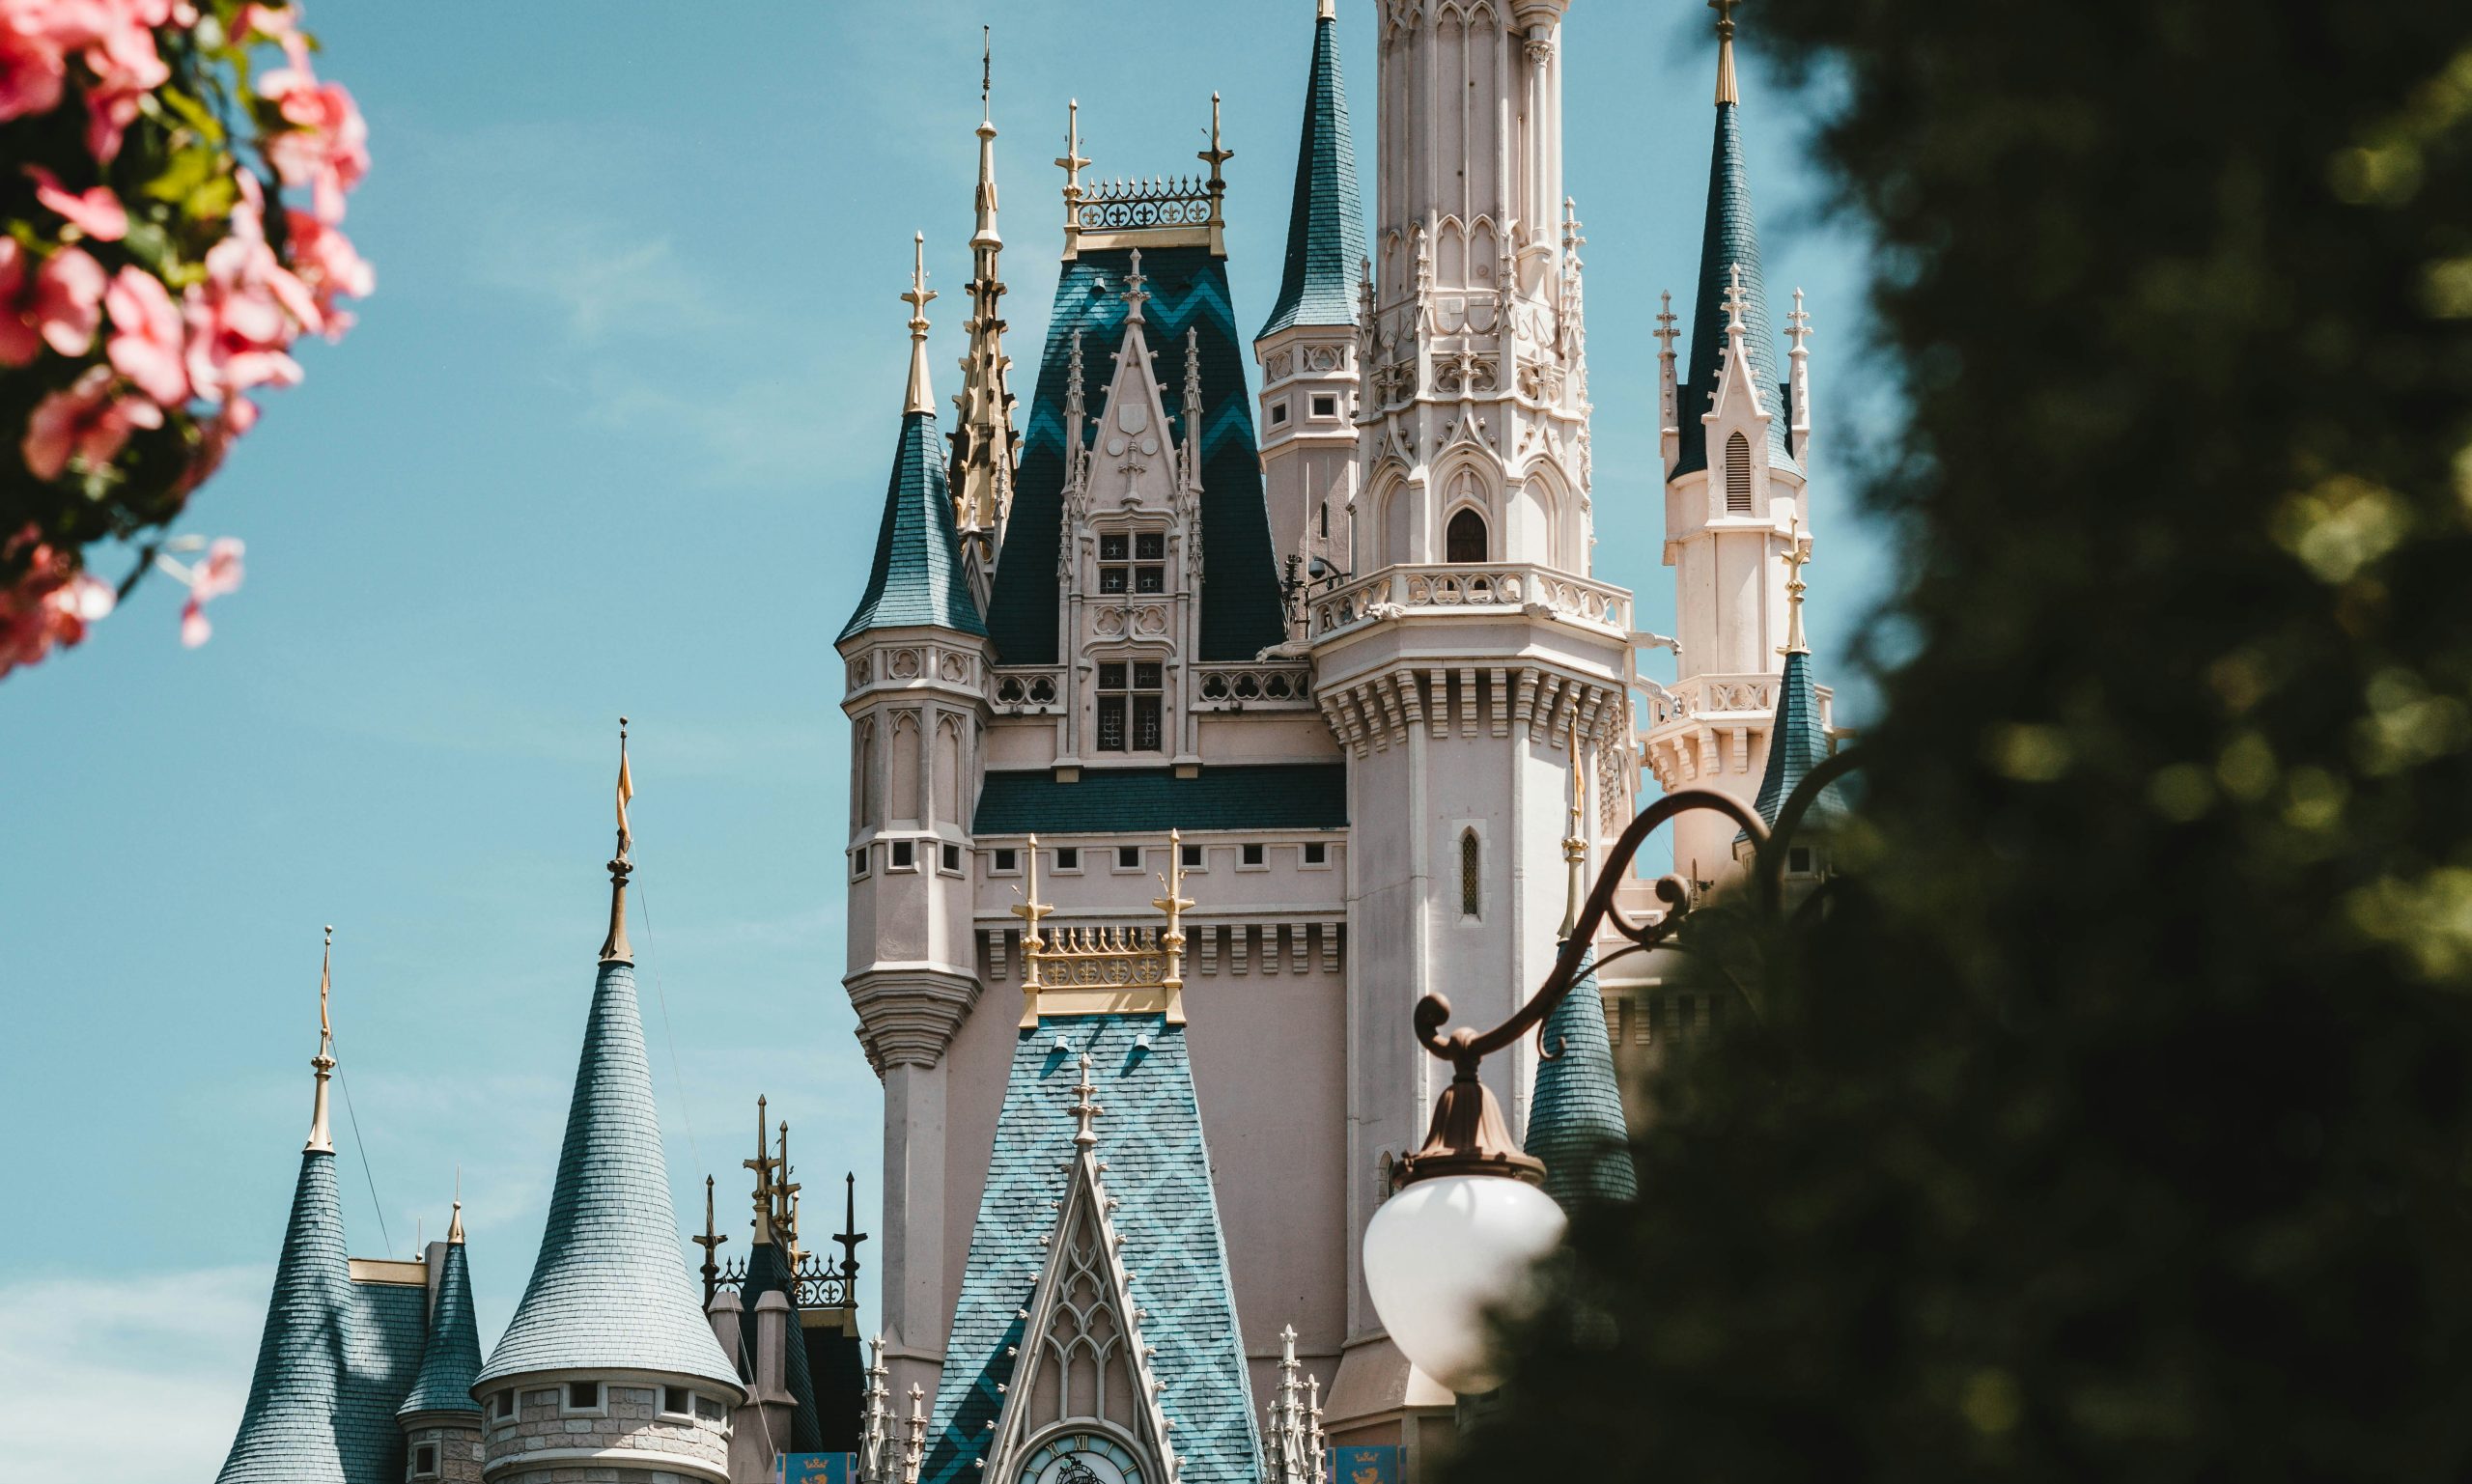 Get Audience Attention Through Storytelling - What Not to Do at Disney World - Photo via Unsplash of Disney castle architecture